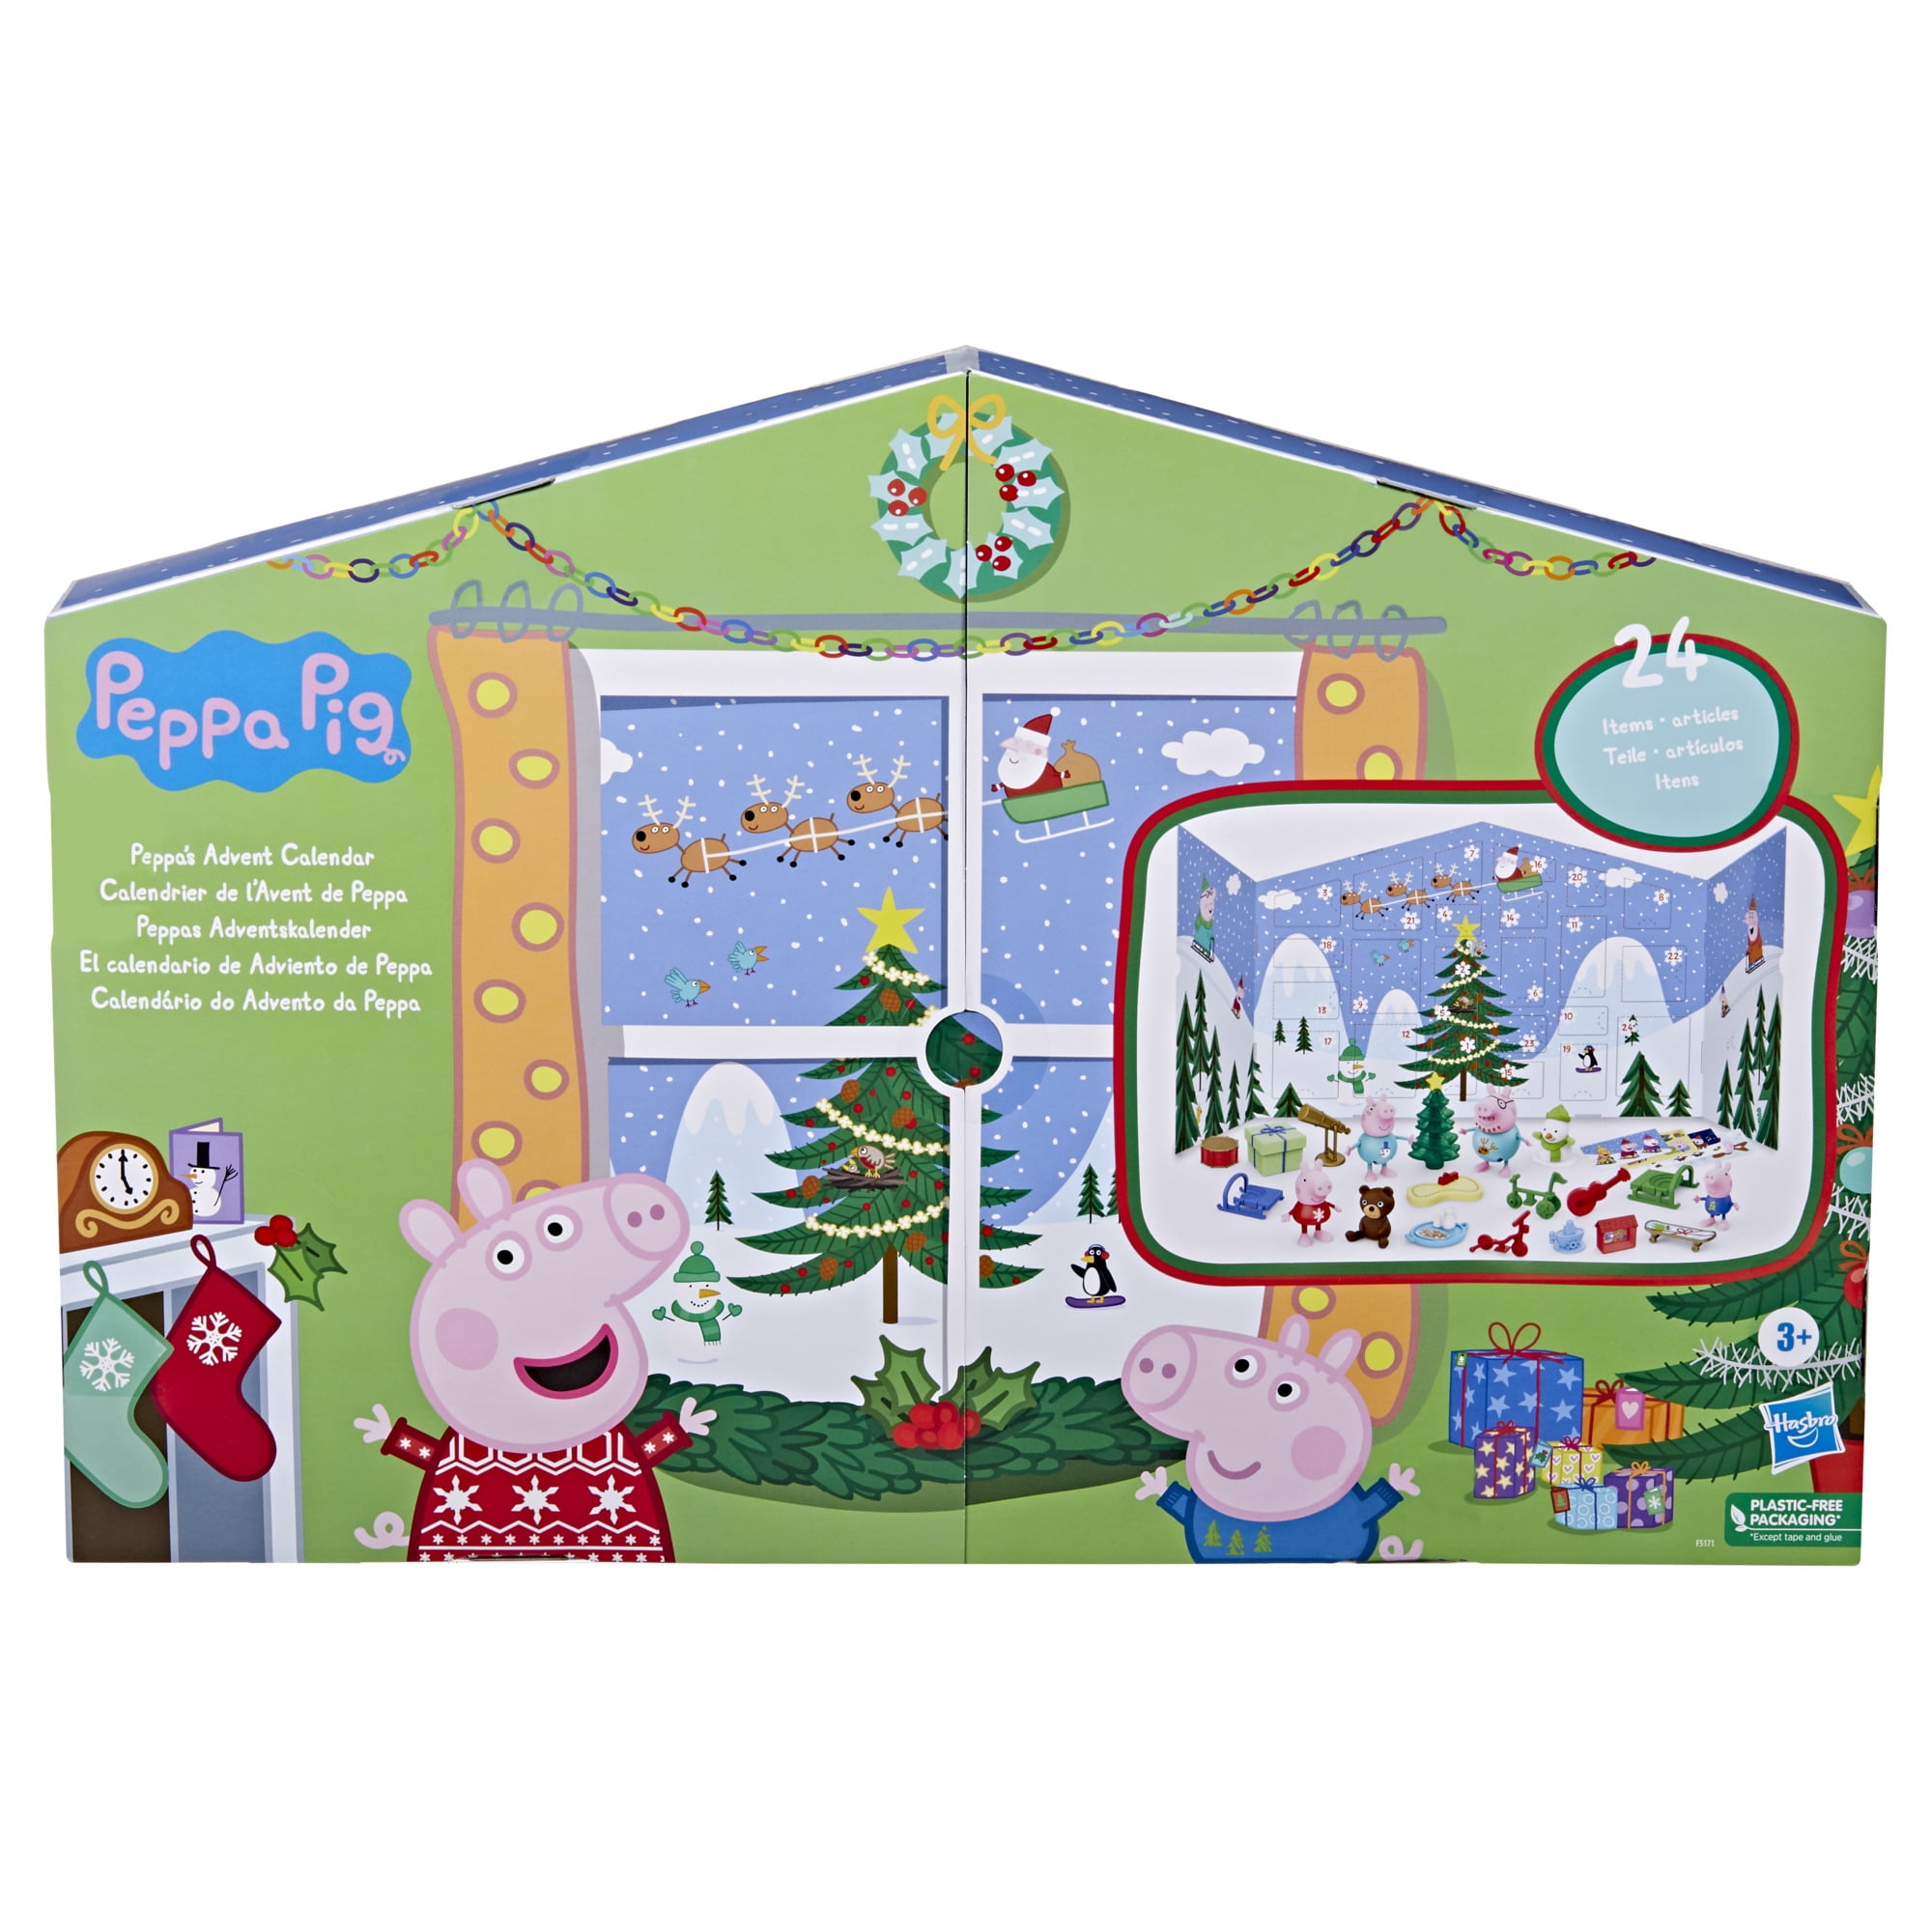 Morrisons - This Peppa Pig advent calendar is £15 in our Black